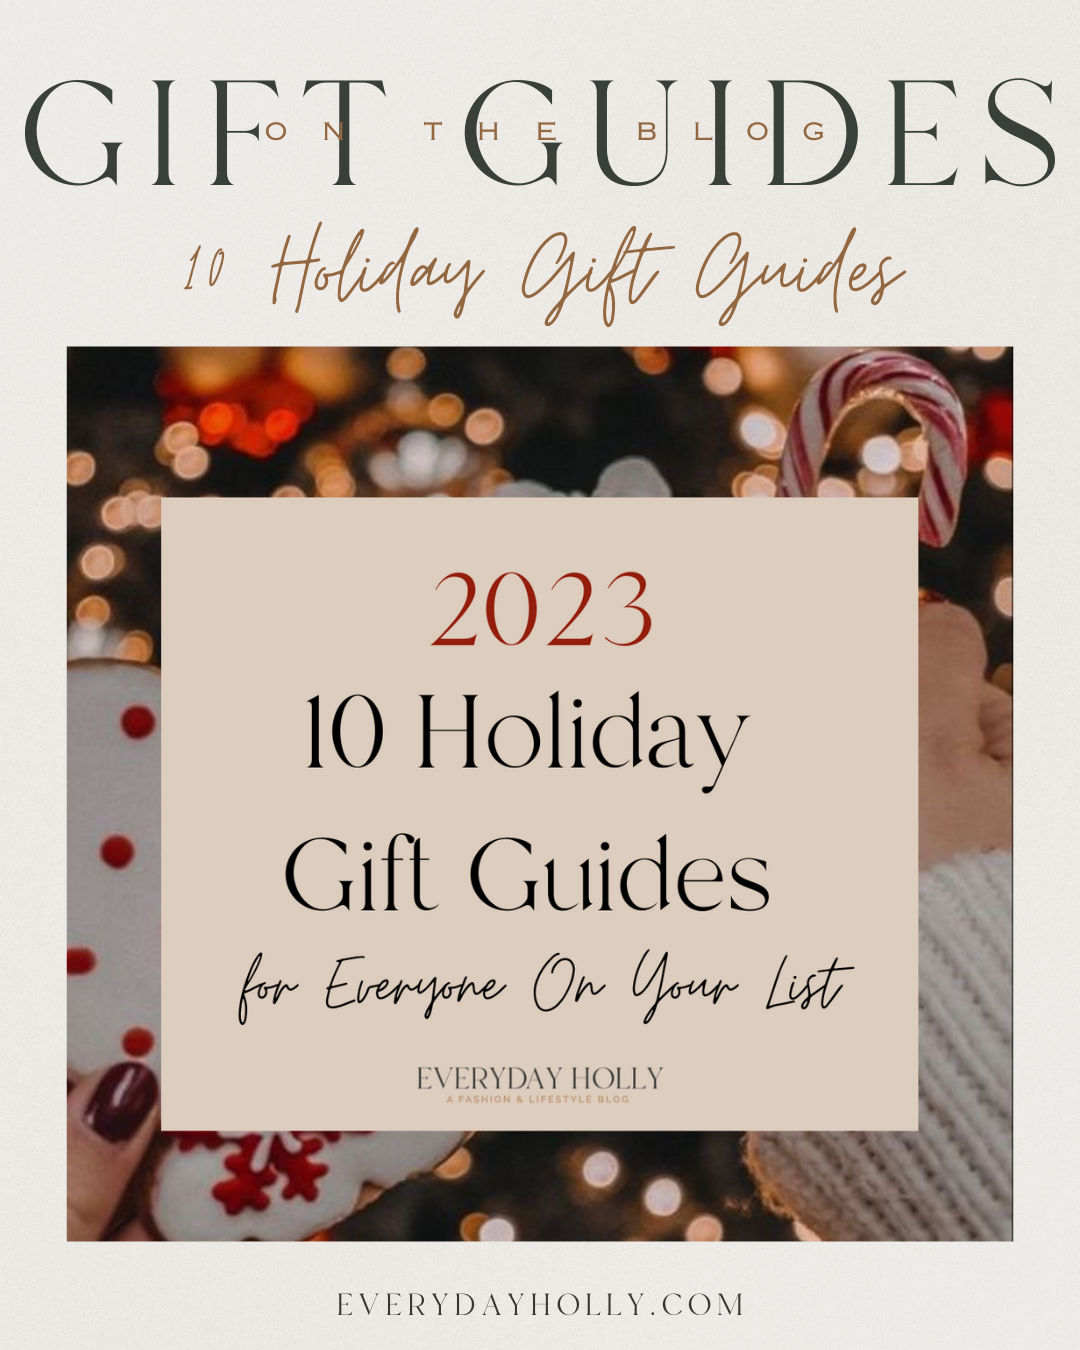 10 Holiday Gift Guides for Everyone This Season | #holiday #giftguide #giftideas #2023 #christmas #gifts #amazon